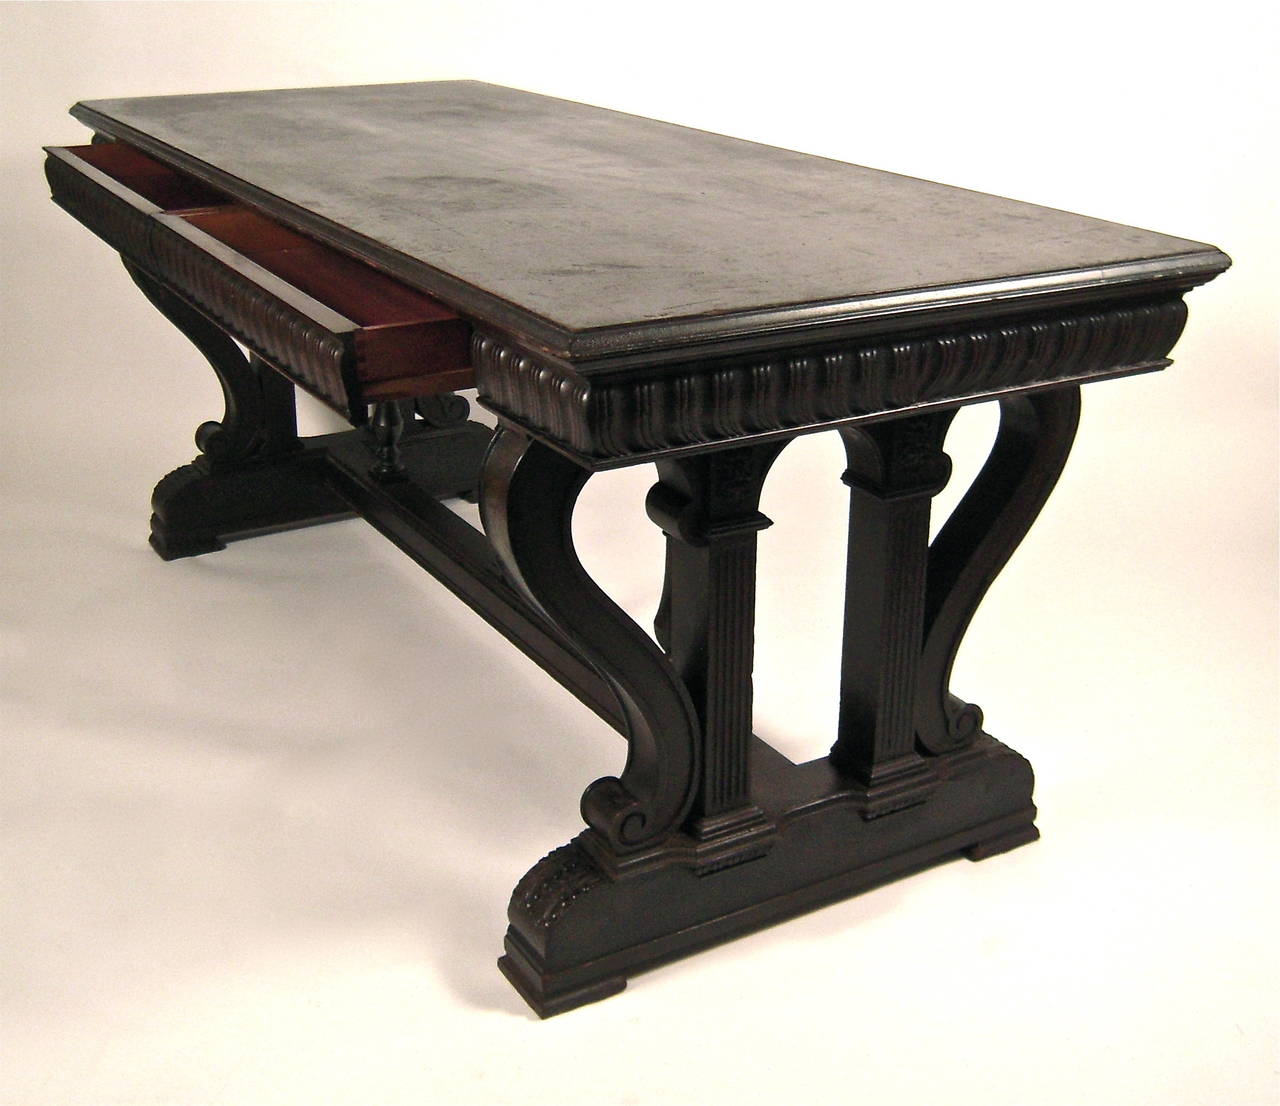 Neoclassical Revival Neoclassical Style Desk or Sofa Table